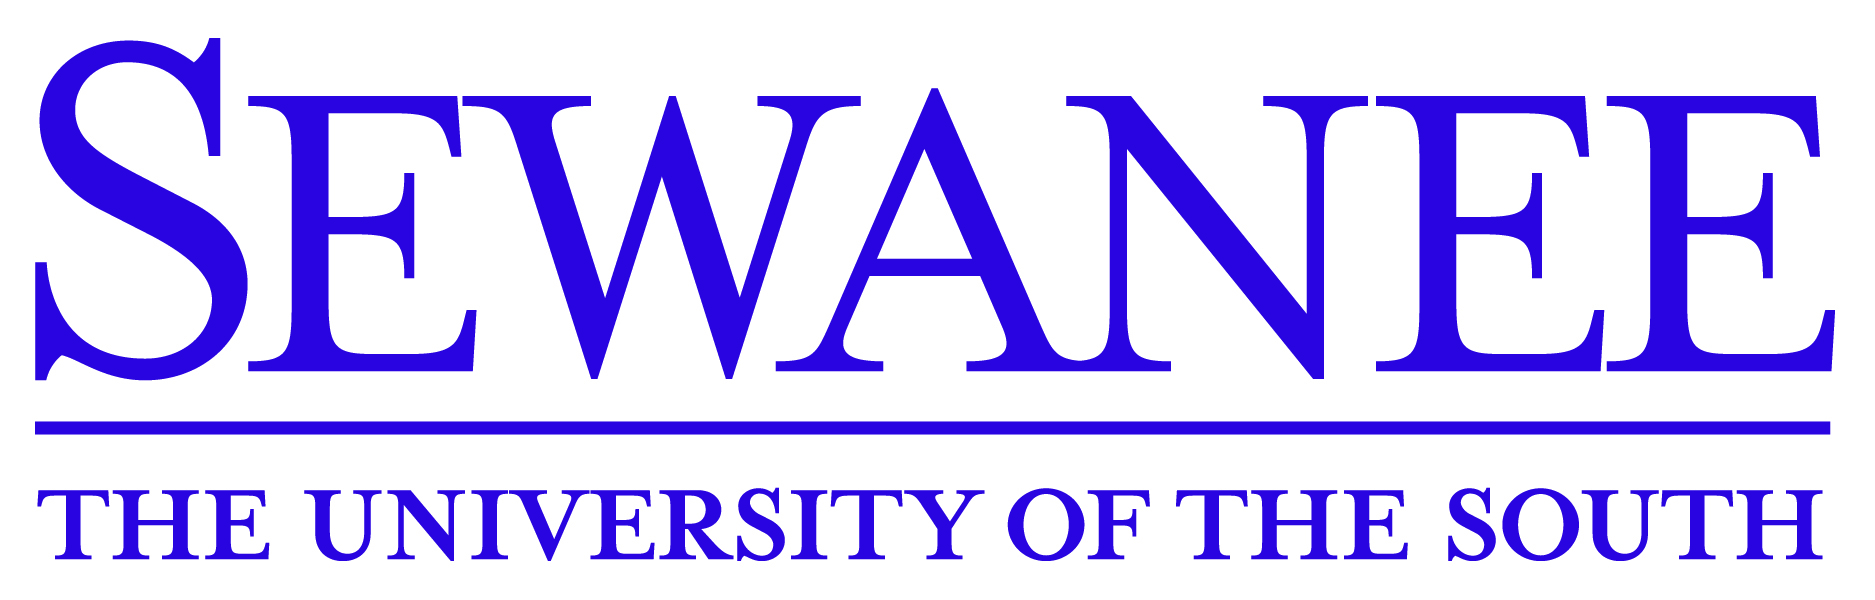 Sewanee Logo with White background and purple letters